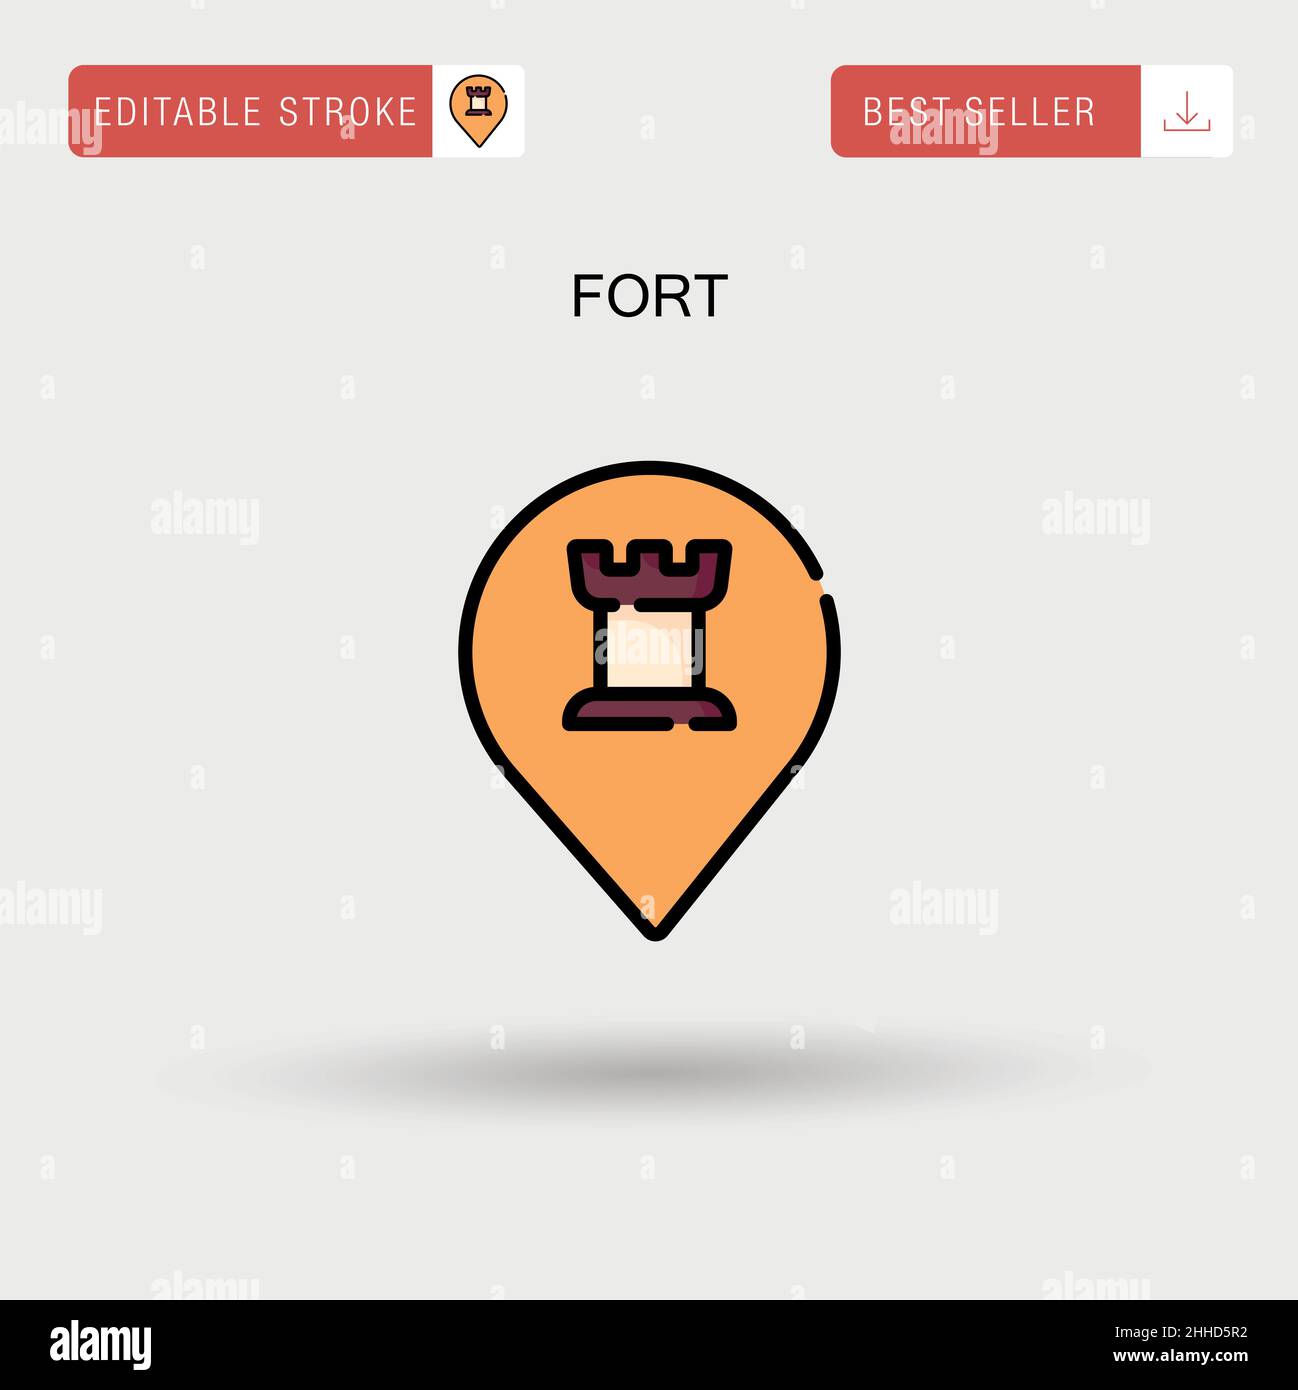 Fort Simple vector icon. Stock Vector